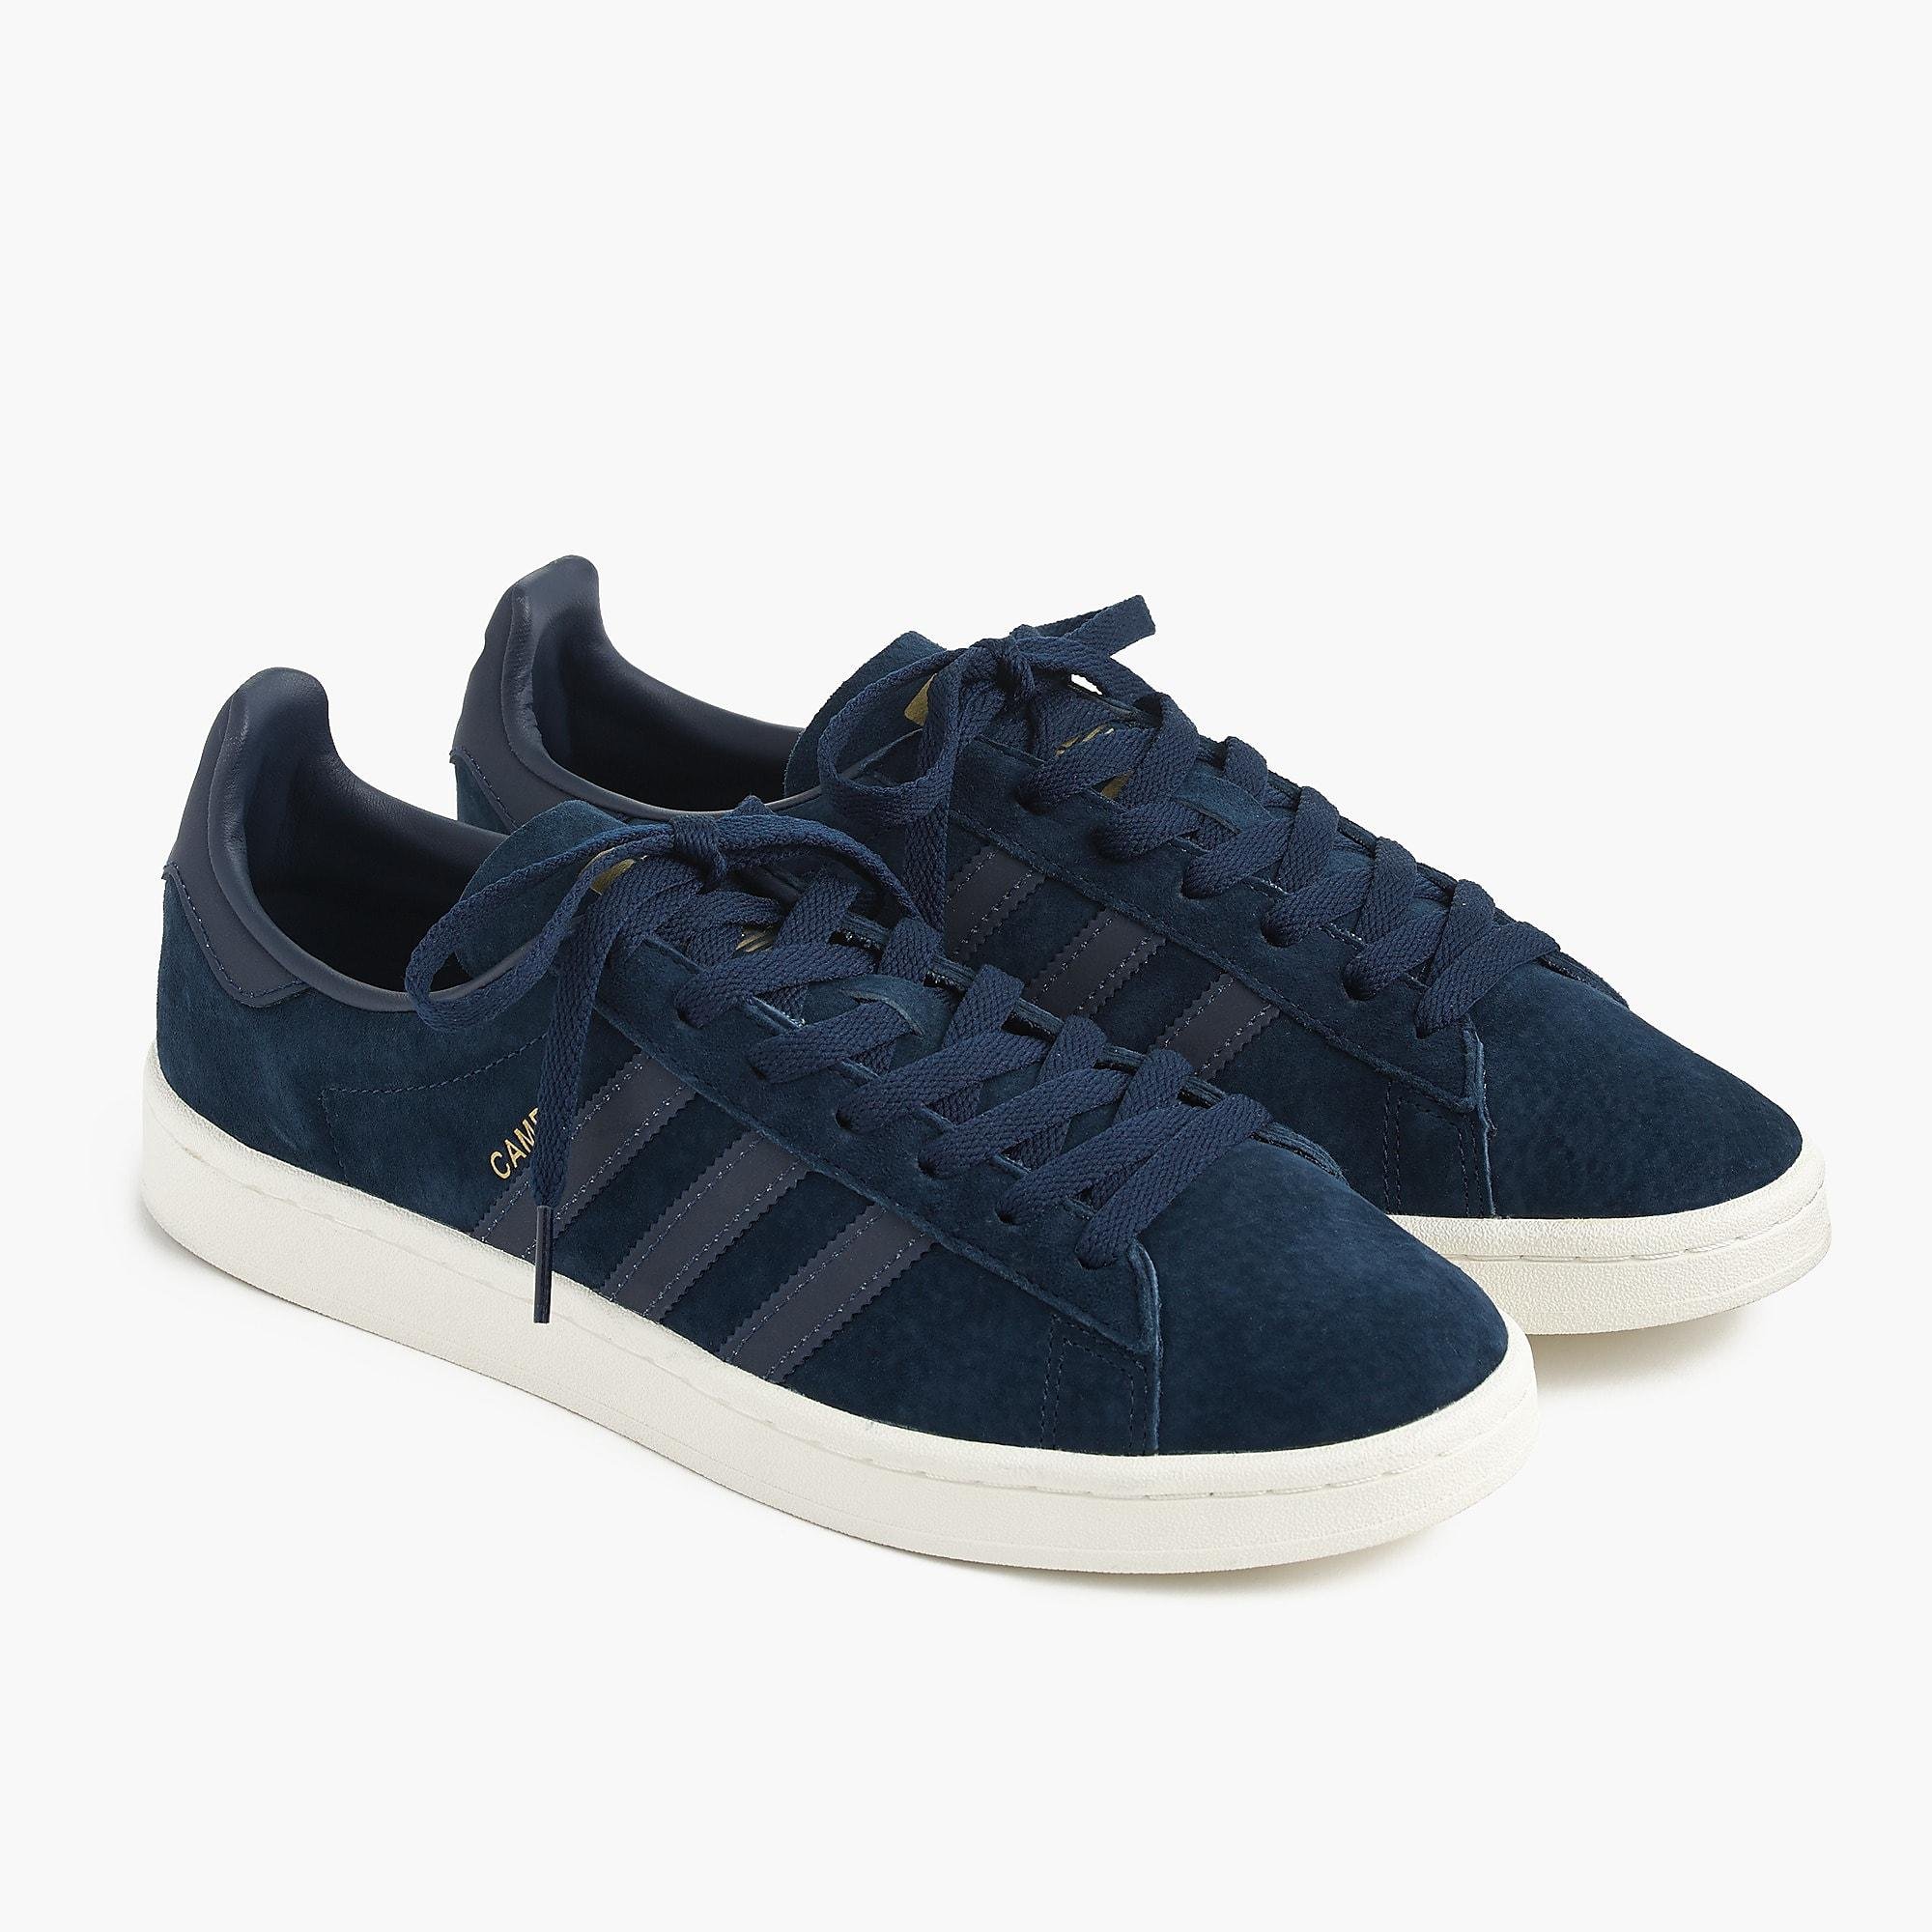 adidas Suede Campus Sneakers in Navy (Blue) for Men - Lyst